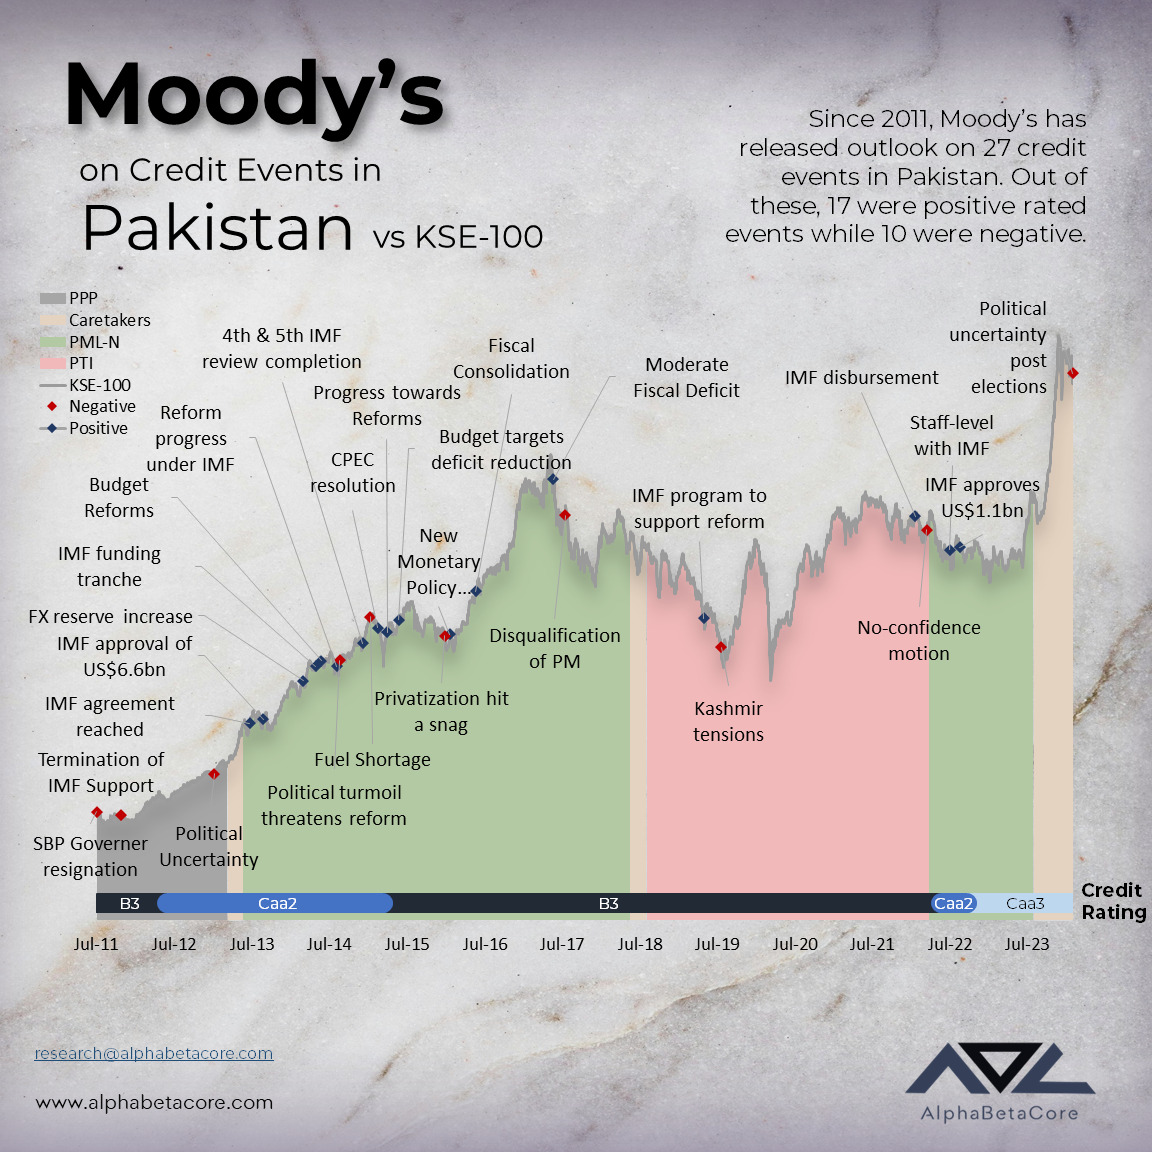 How Moody's Credit Events on Pakistan shaped with relevant developments since 2011 to date.

Credit Event:
-Total: 27
-Positive: 17
-Negative: 10

Pakistan Credit Rating:
-Moody's: Caa3
-S&P: CCC+
-Outlook (both): Stable

@Financegovpk @StateBank_Pak @pakstockexgltd @MoodysInvSvc